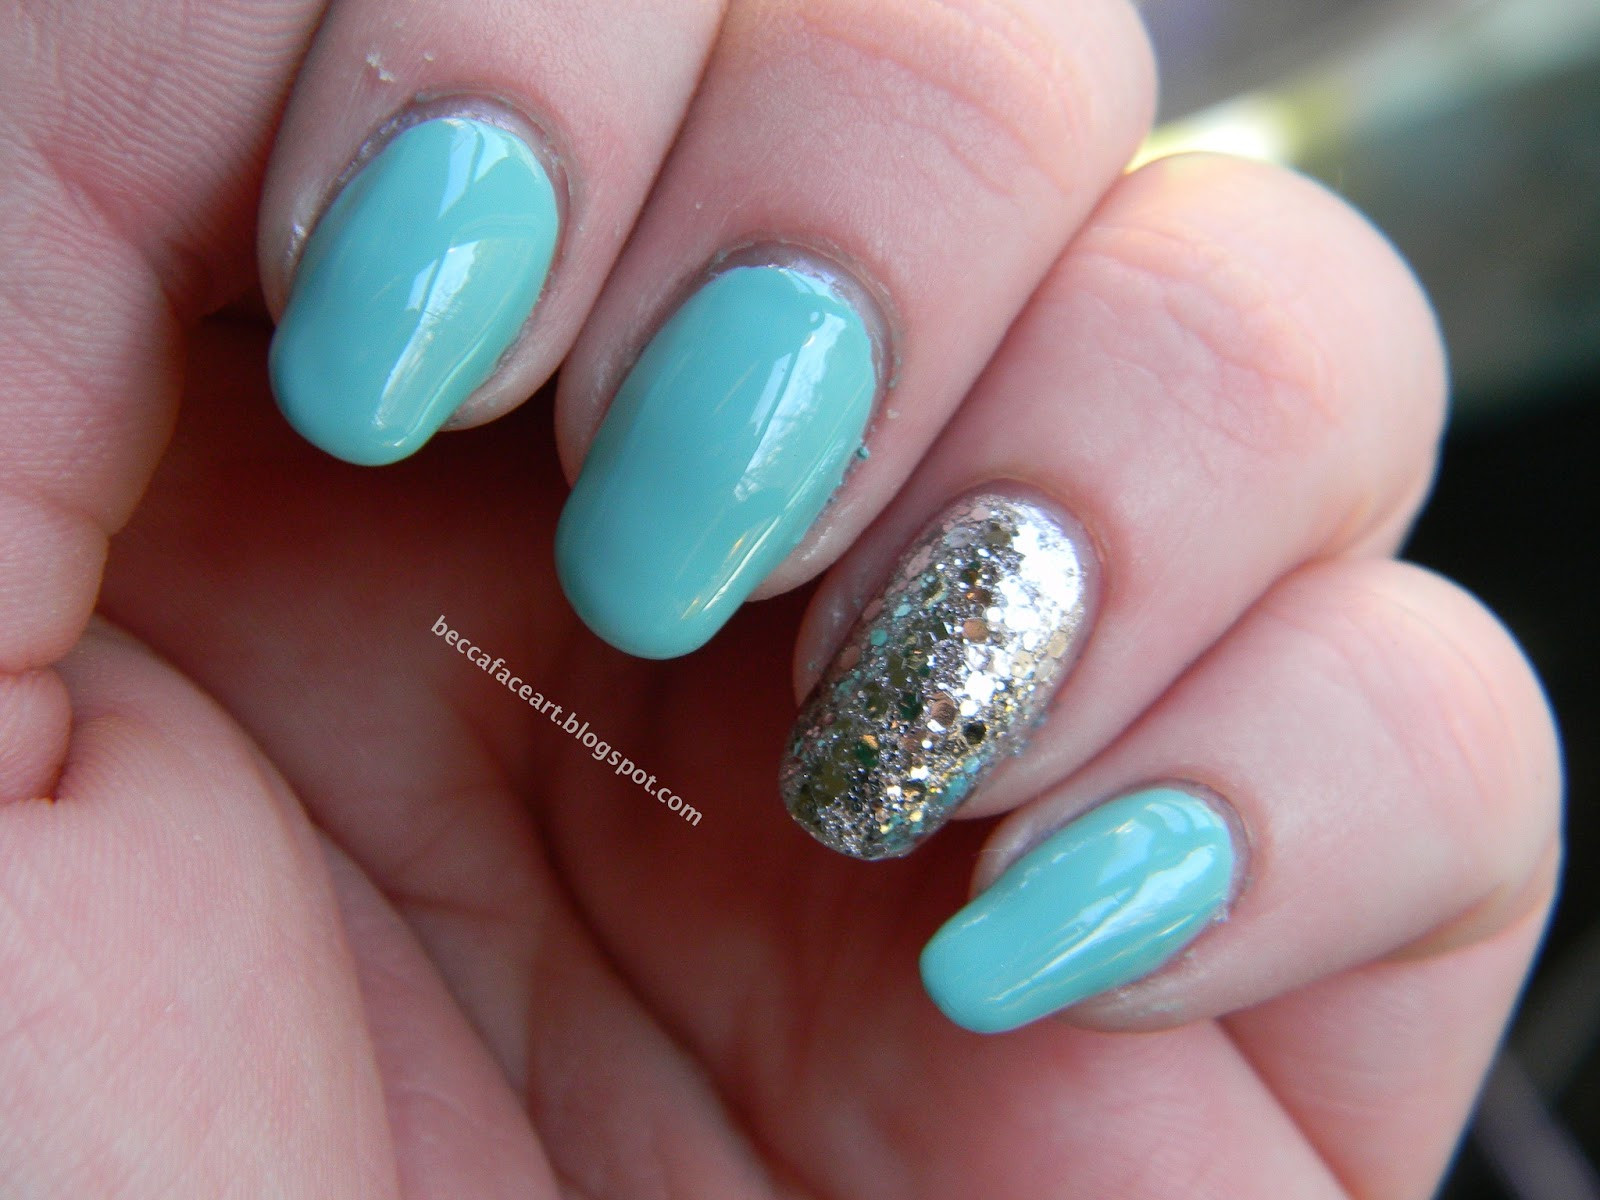 Turquoise Glitter Nails
 Becca Face Nail Art Turquoise and Silver Glitter Nails